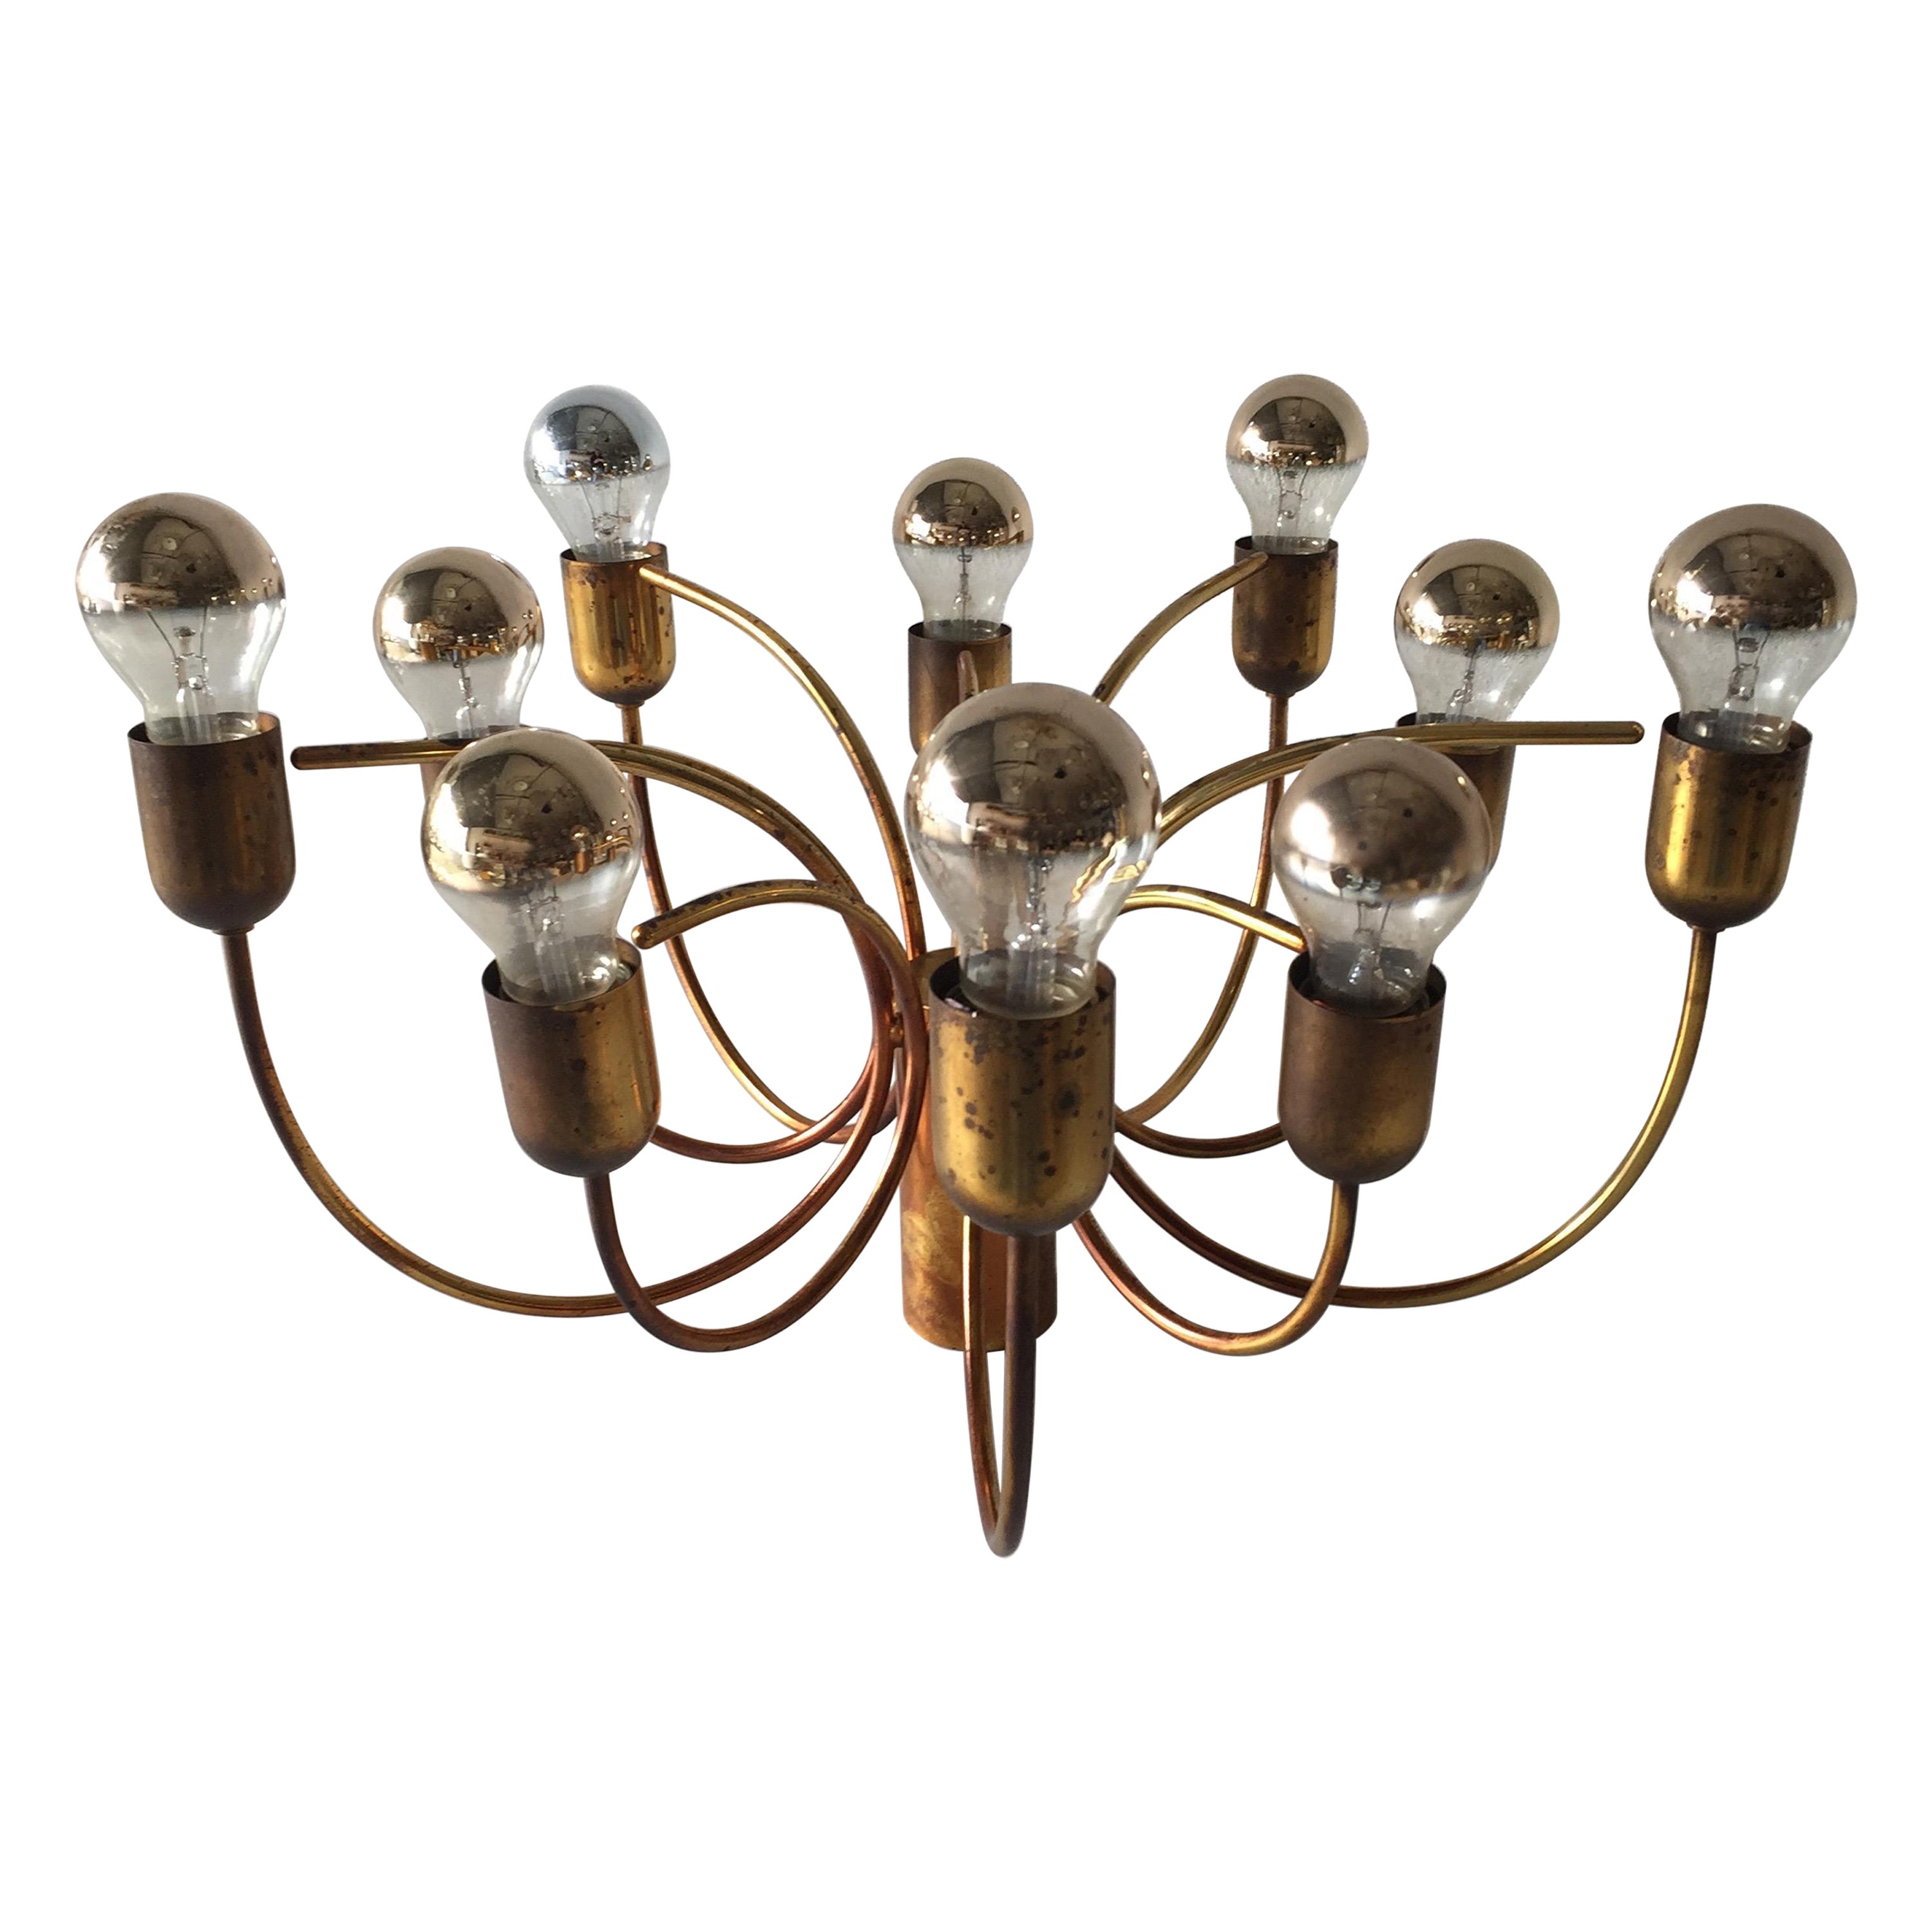 Rare 10 Arc Shaped Arms Full Brass Chandelier by Cosack Leuchten, 1970s Germany For Sale